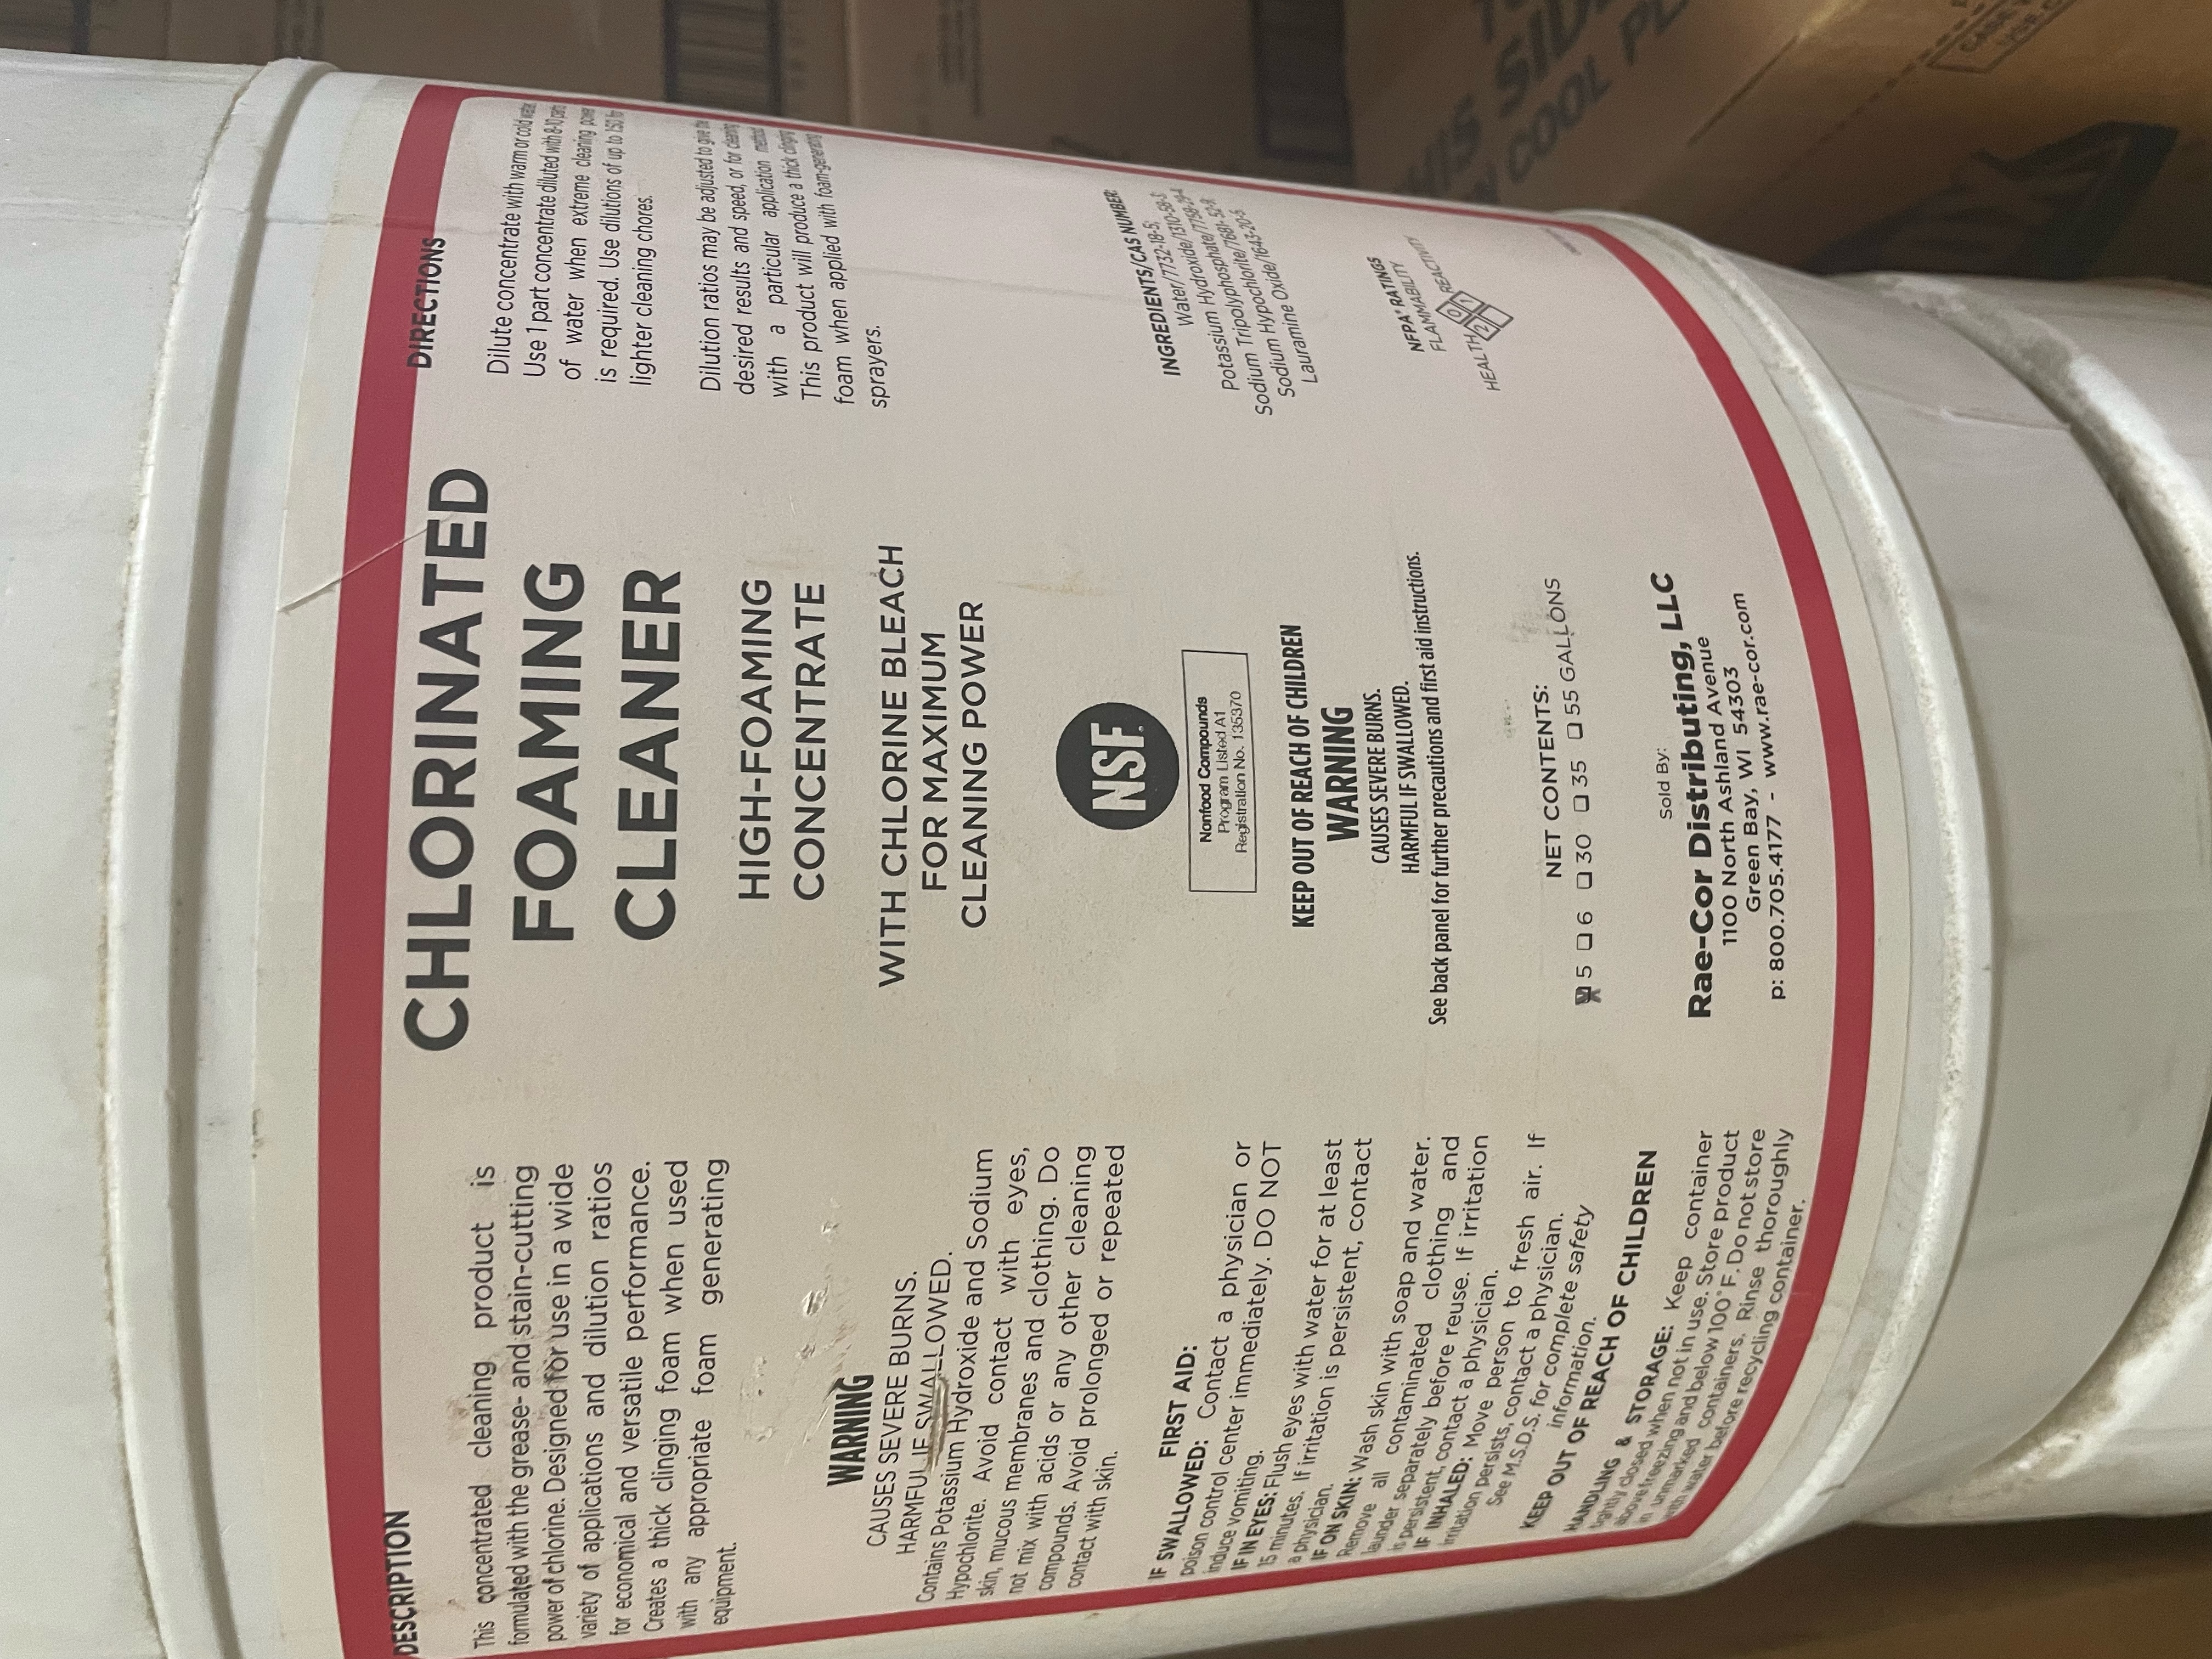 CHLORINATED FOAMING CLEANER 5
GALLON PAIL